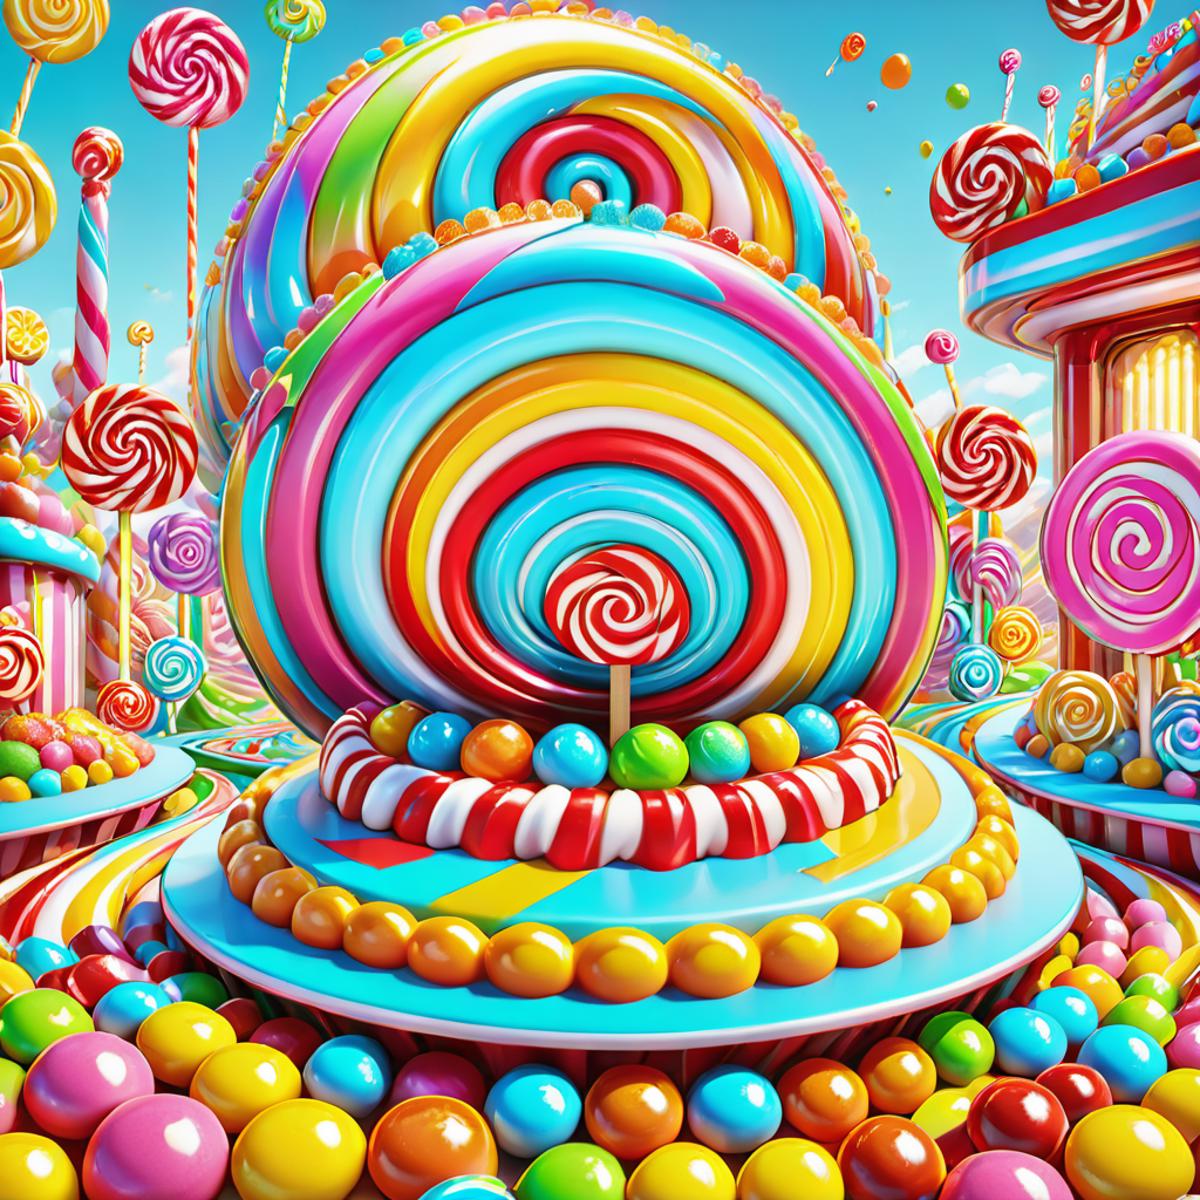 Candy Land image by DonMischo